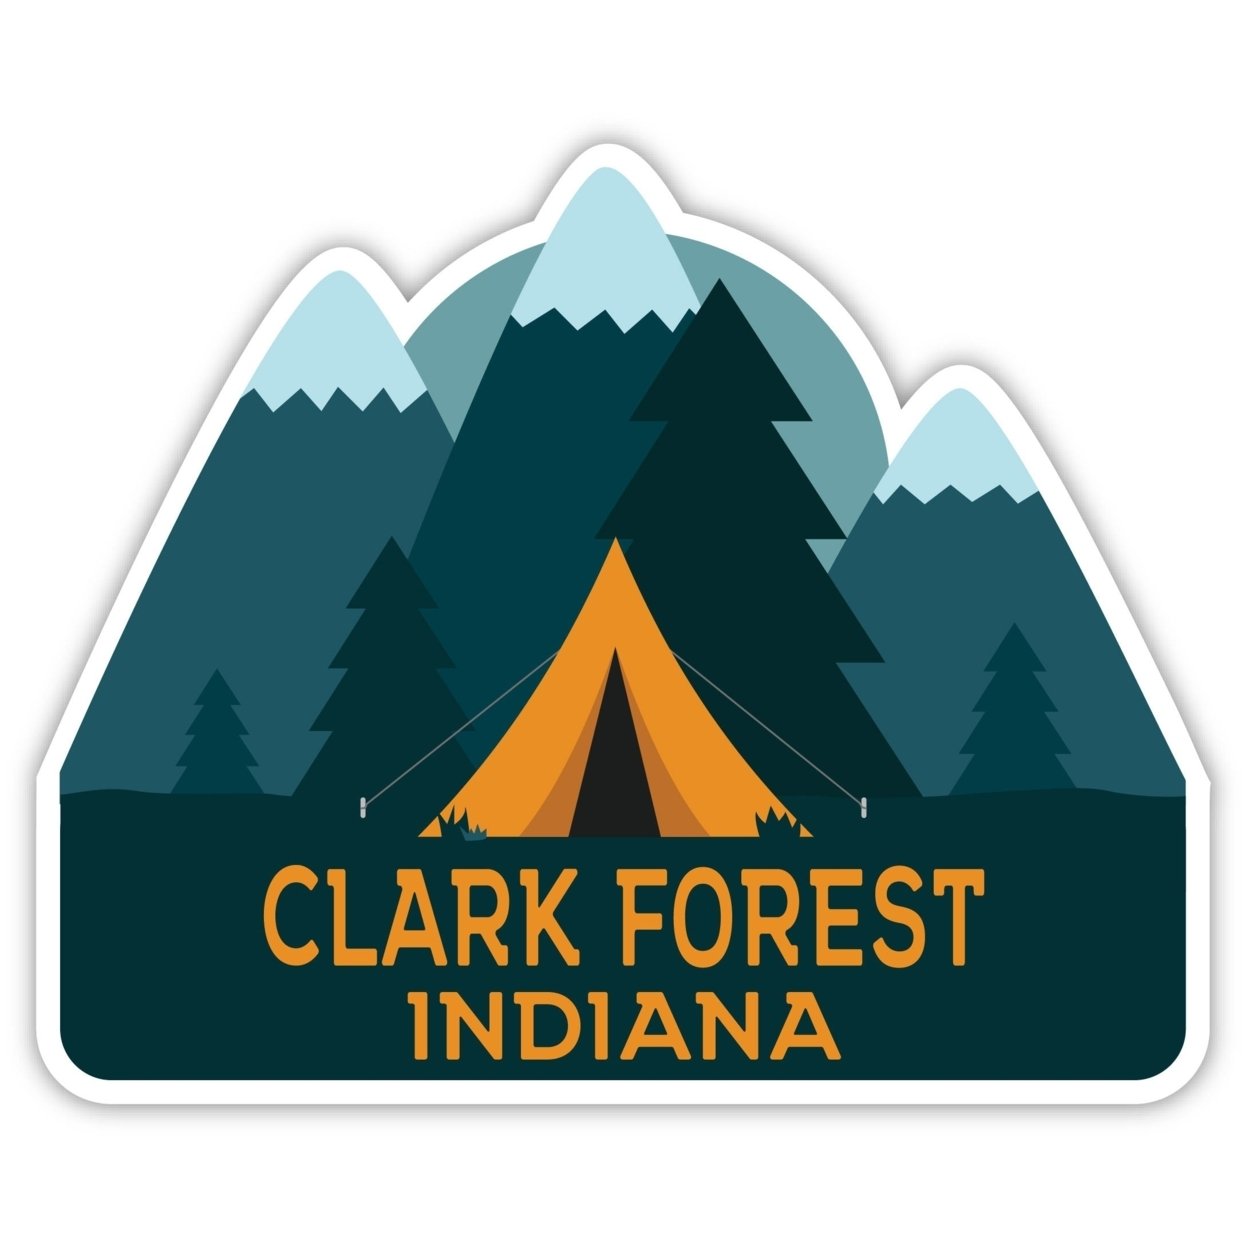 Clark Forest Indiana Souvenir Decorative Stickers (Choose Theme And Size) - 4-Pack, 4-Inch, Tent